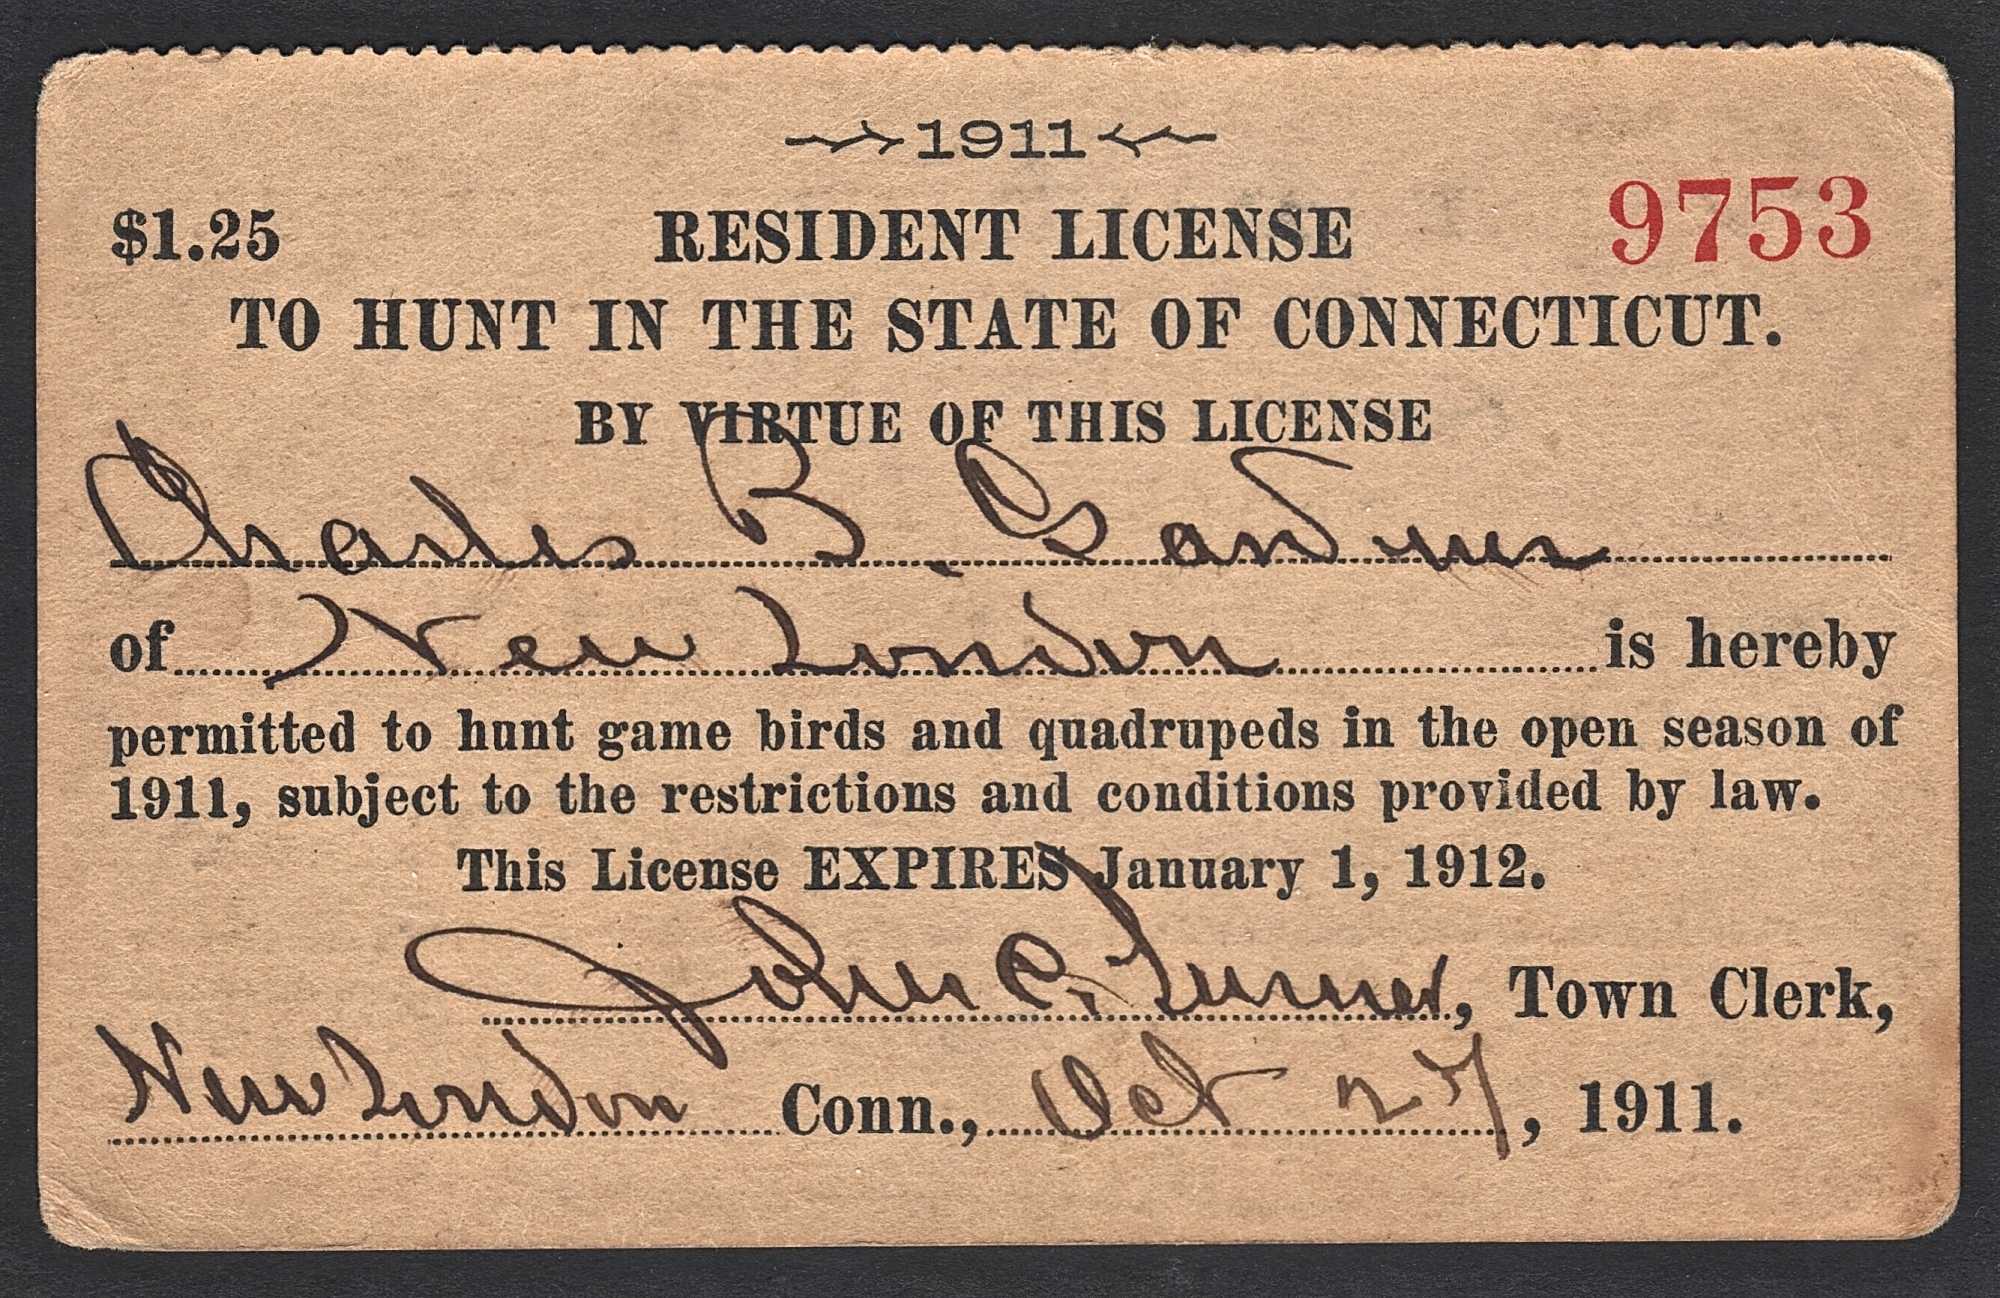 1911-12 Connecticut Resident License to Hunt